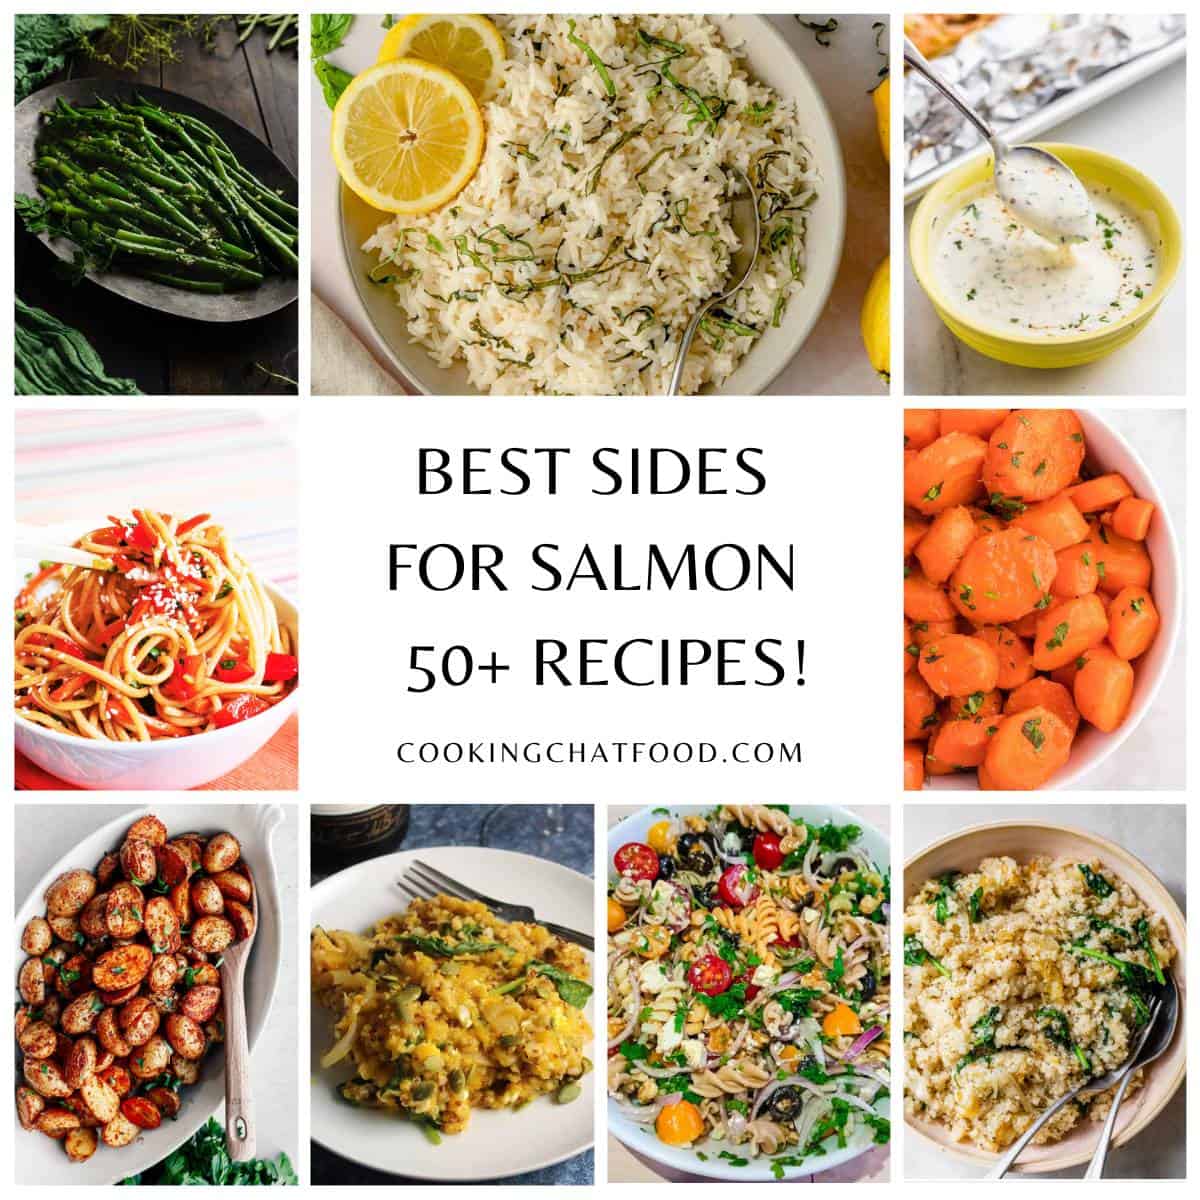 A collage with photos of different salmon side dish recipes, with text in the middle that says, "Best Sides for Salmon".